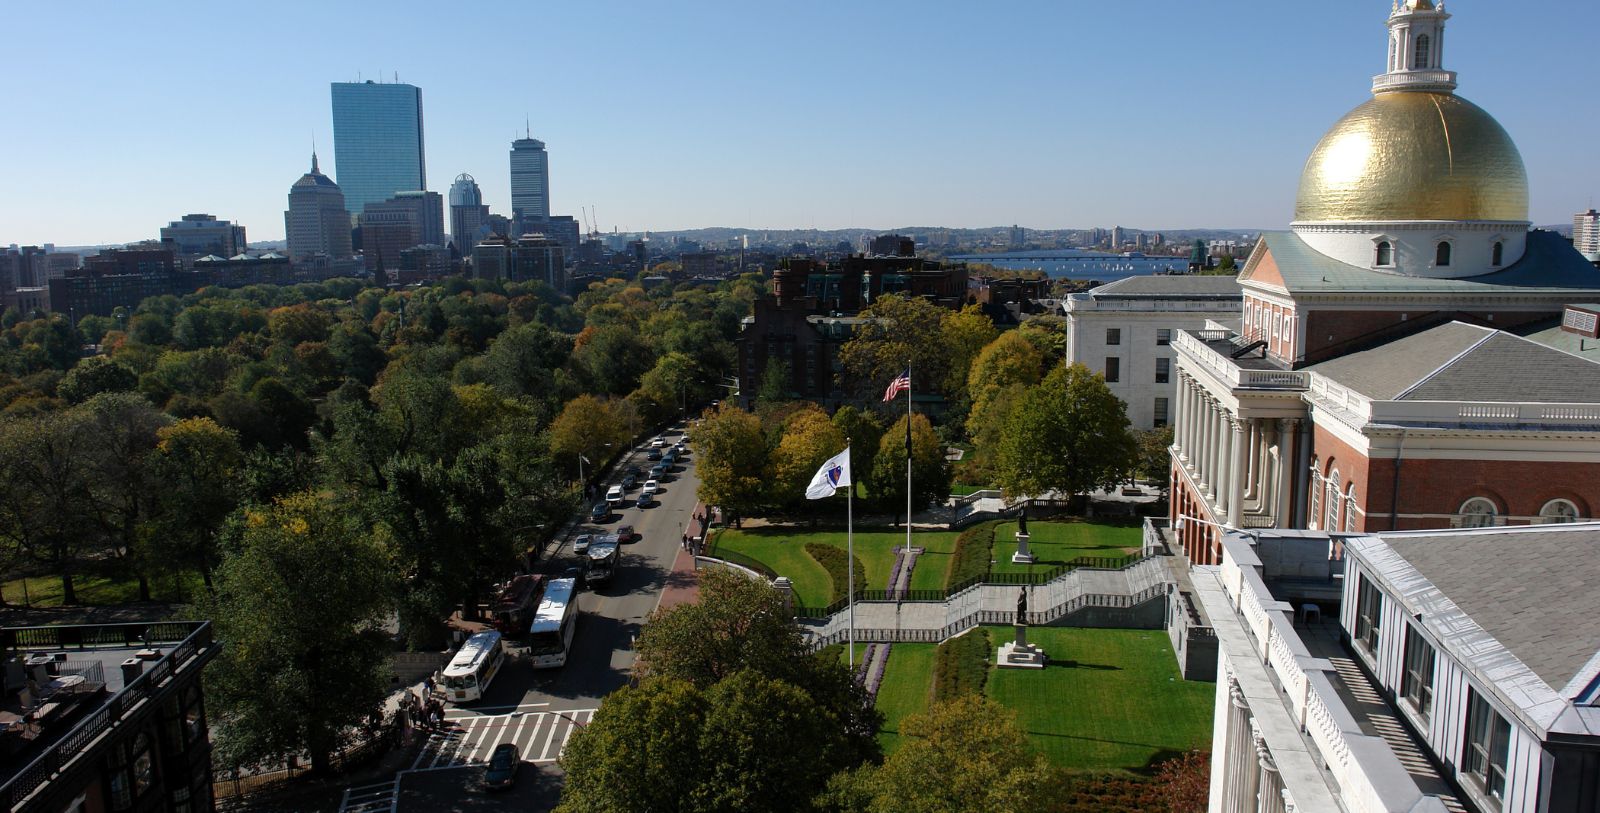 Explore Boston’s Revolutionary War history through visits to the Old North Church and Boston National Historic Park.